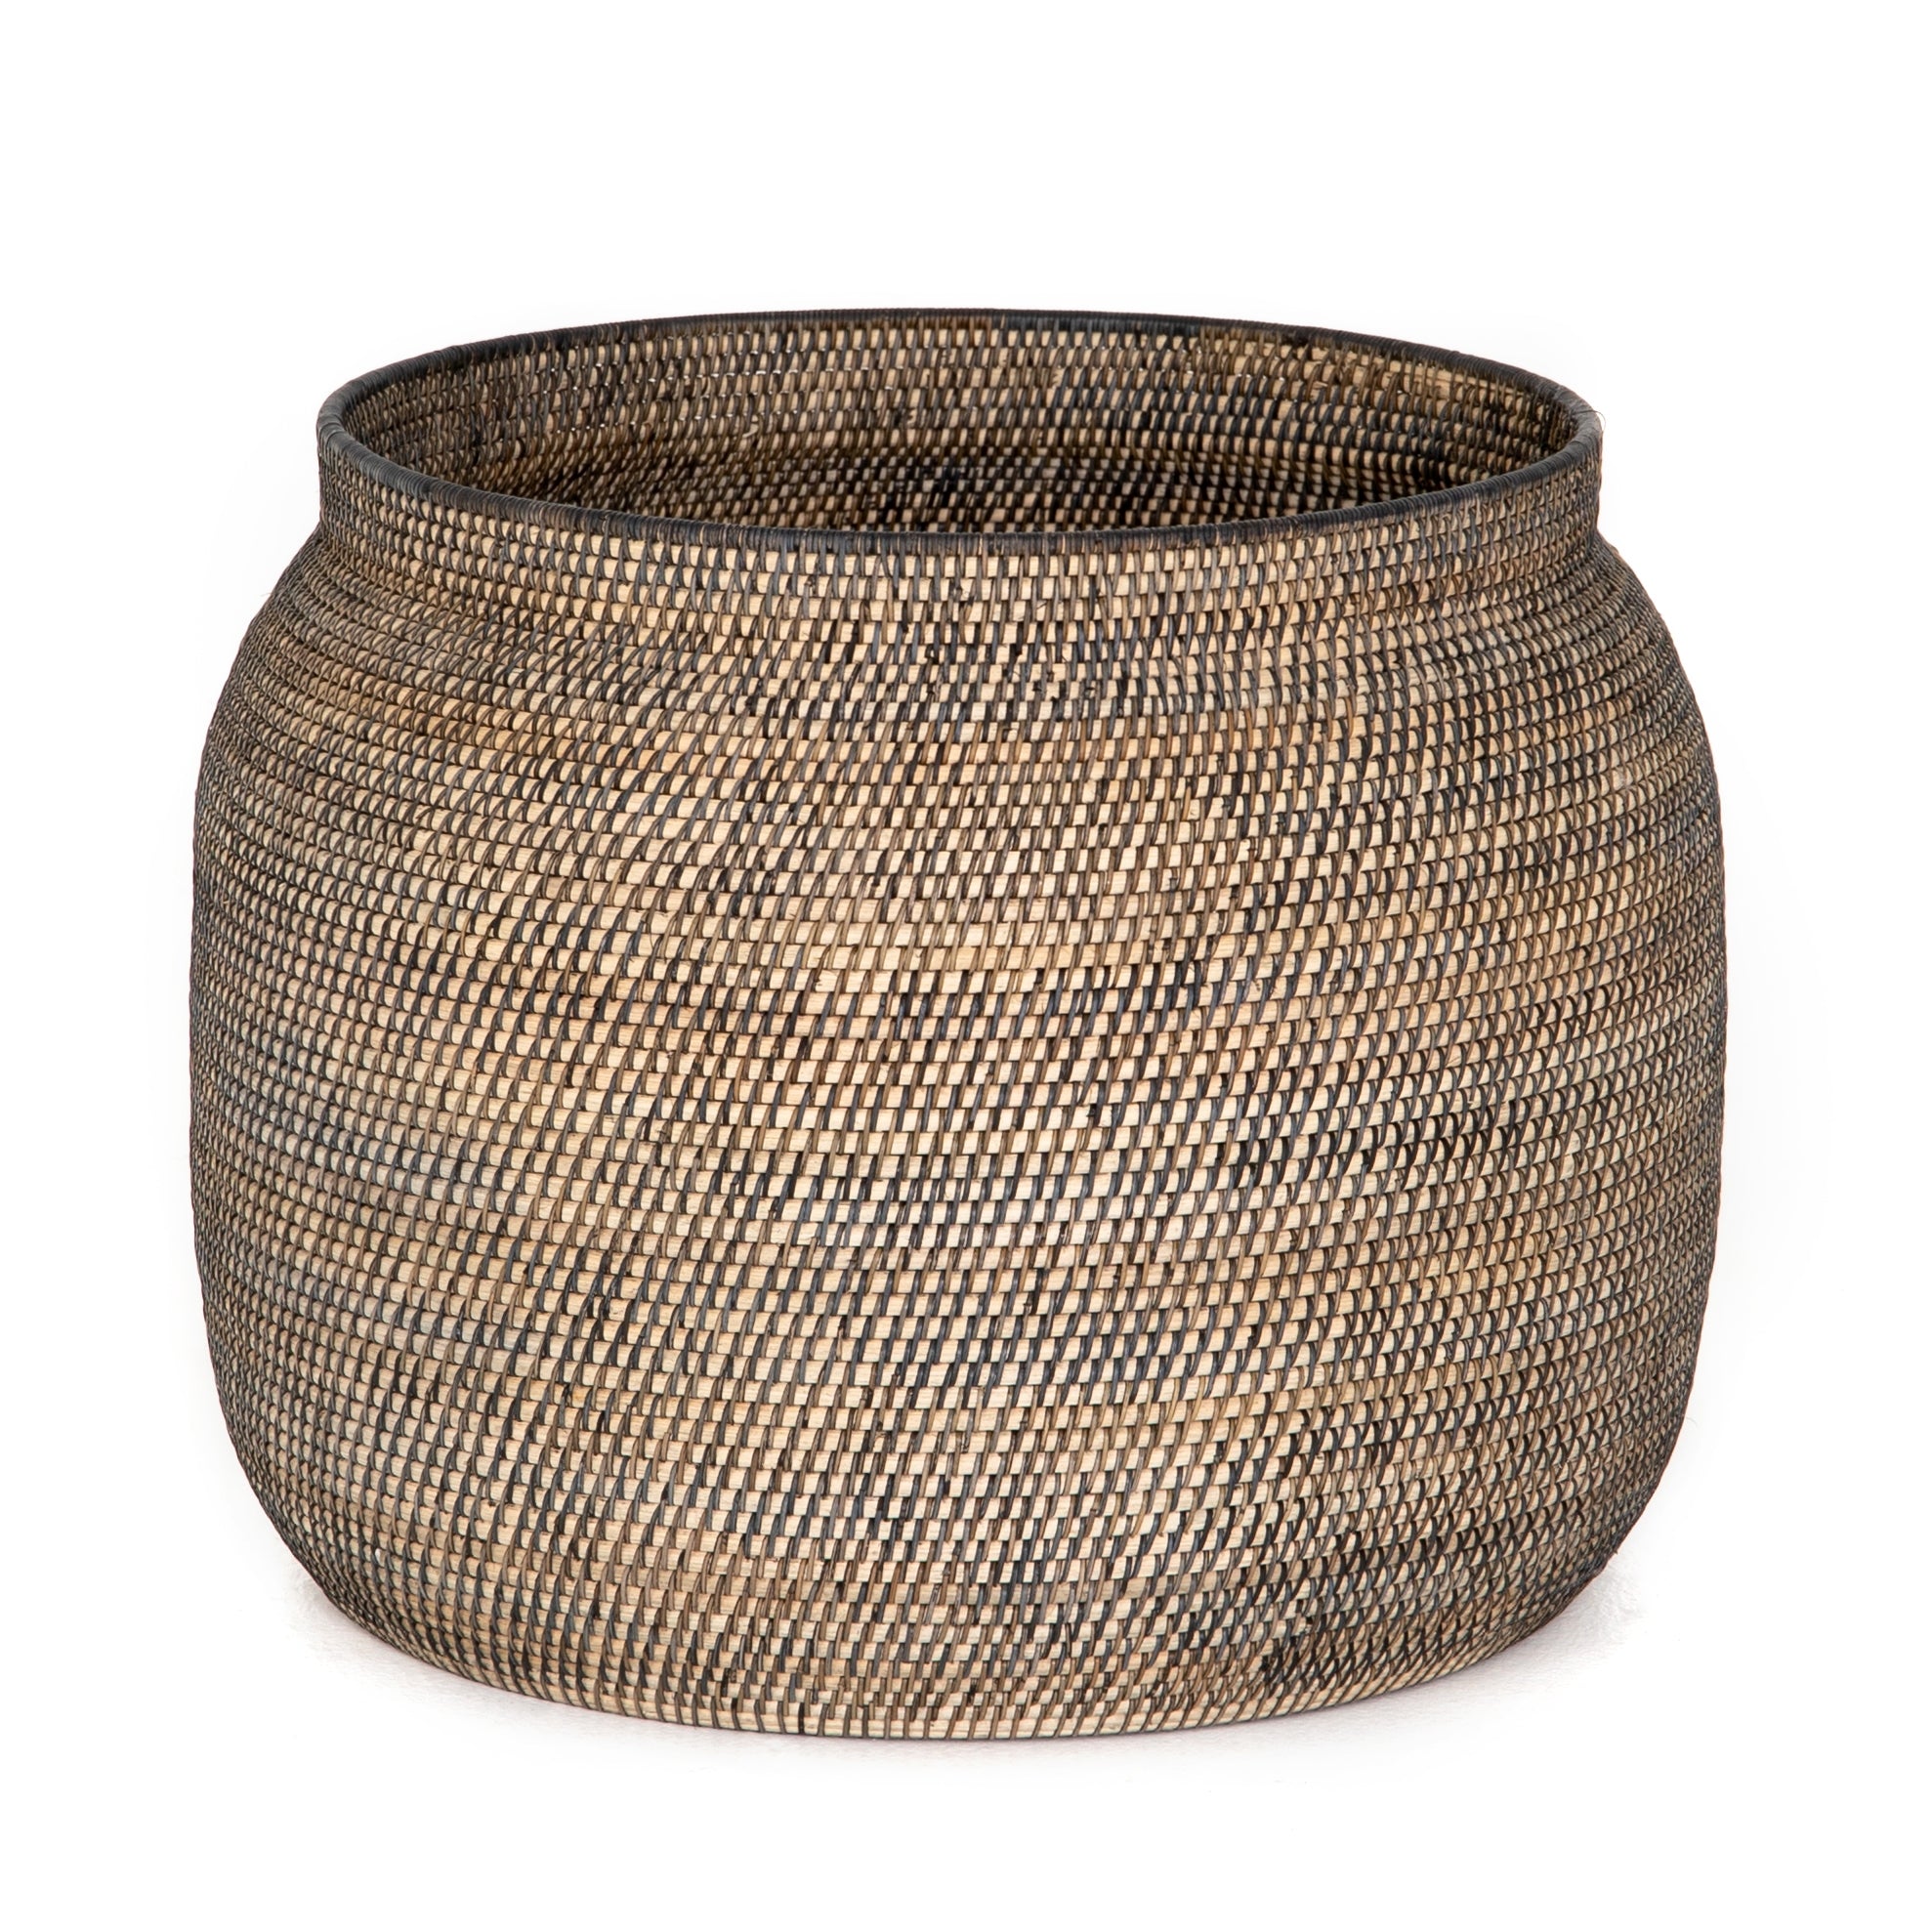 This Ansel Contrast Black Basket is woven from natural Lombok and black rattan, bringing a gorgeous color and texture to the basket. A large, stylish basket to store your pet toys, blankets, or other items around the home.   Overall Dimensions: 24.00